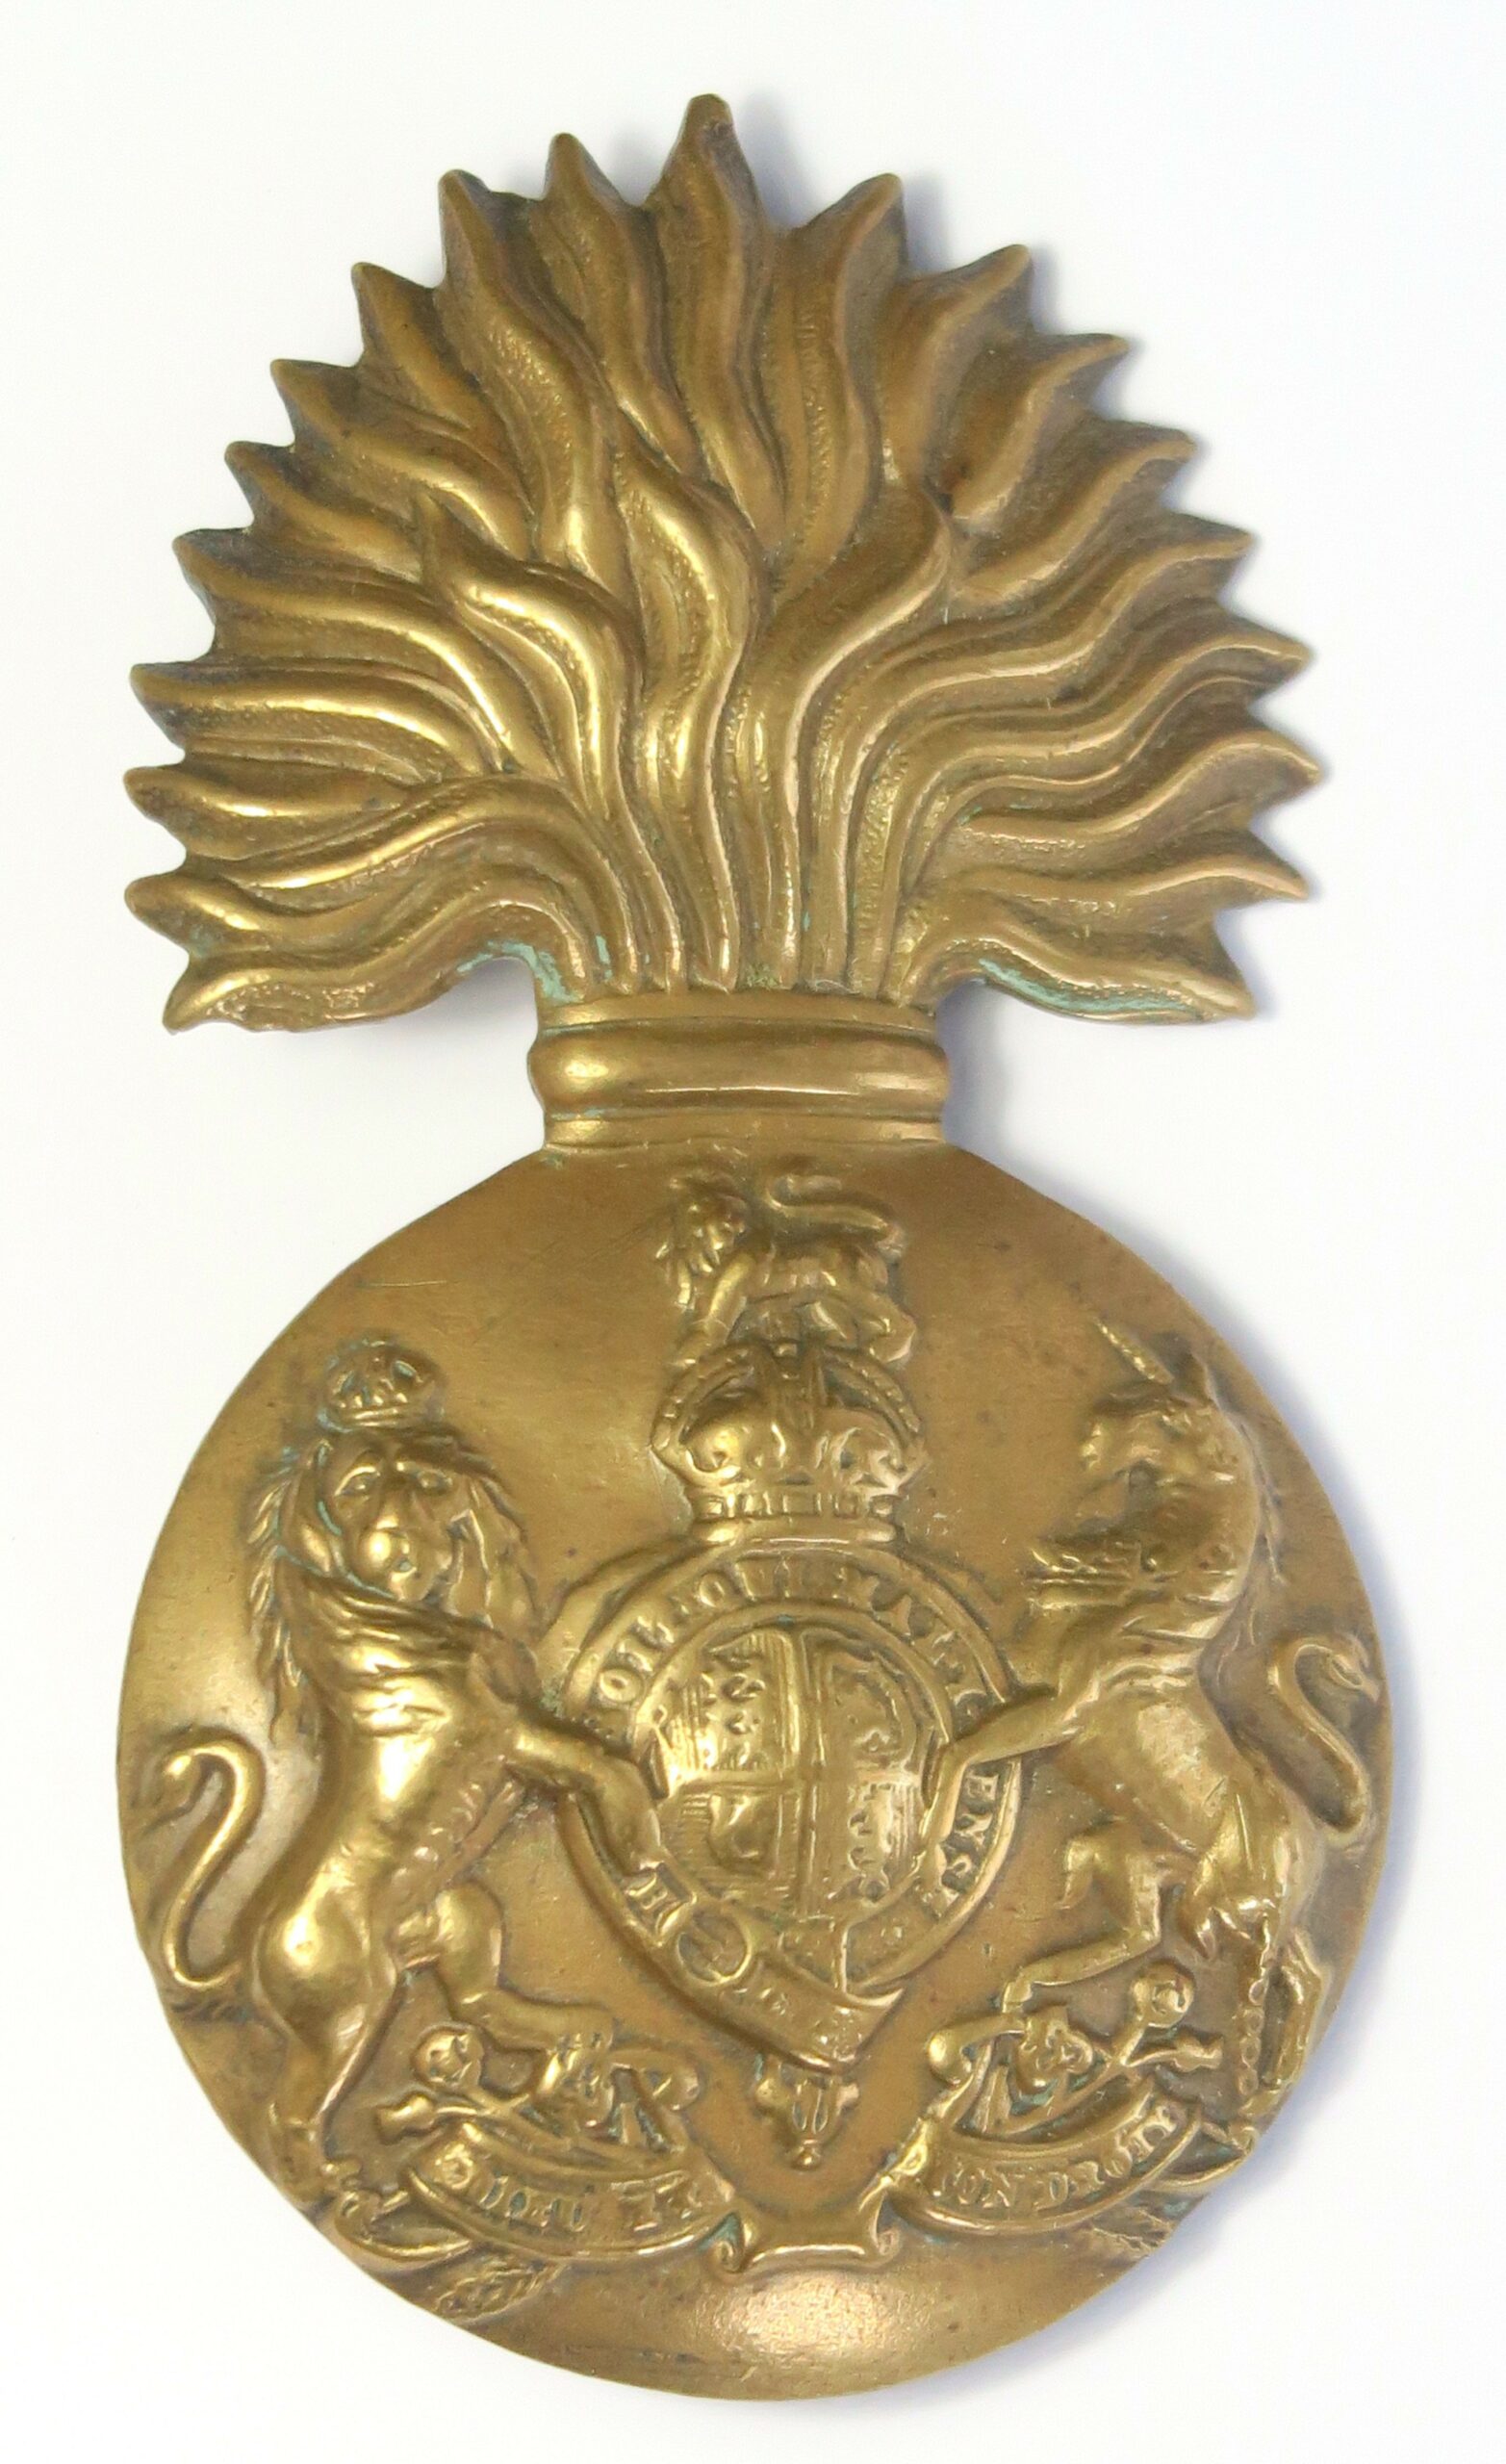 Fusiliers cap badge - colonialcollectables buying and selling coins ...